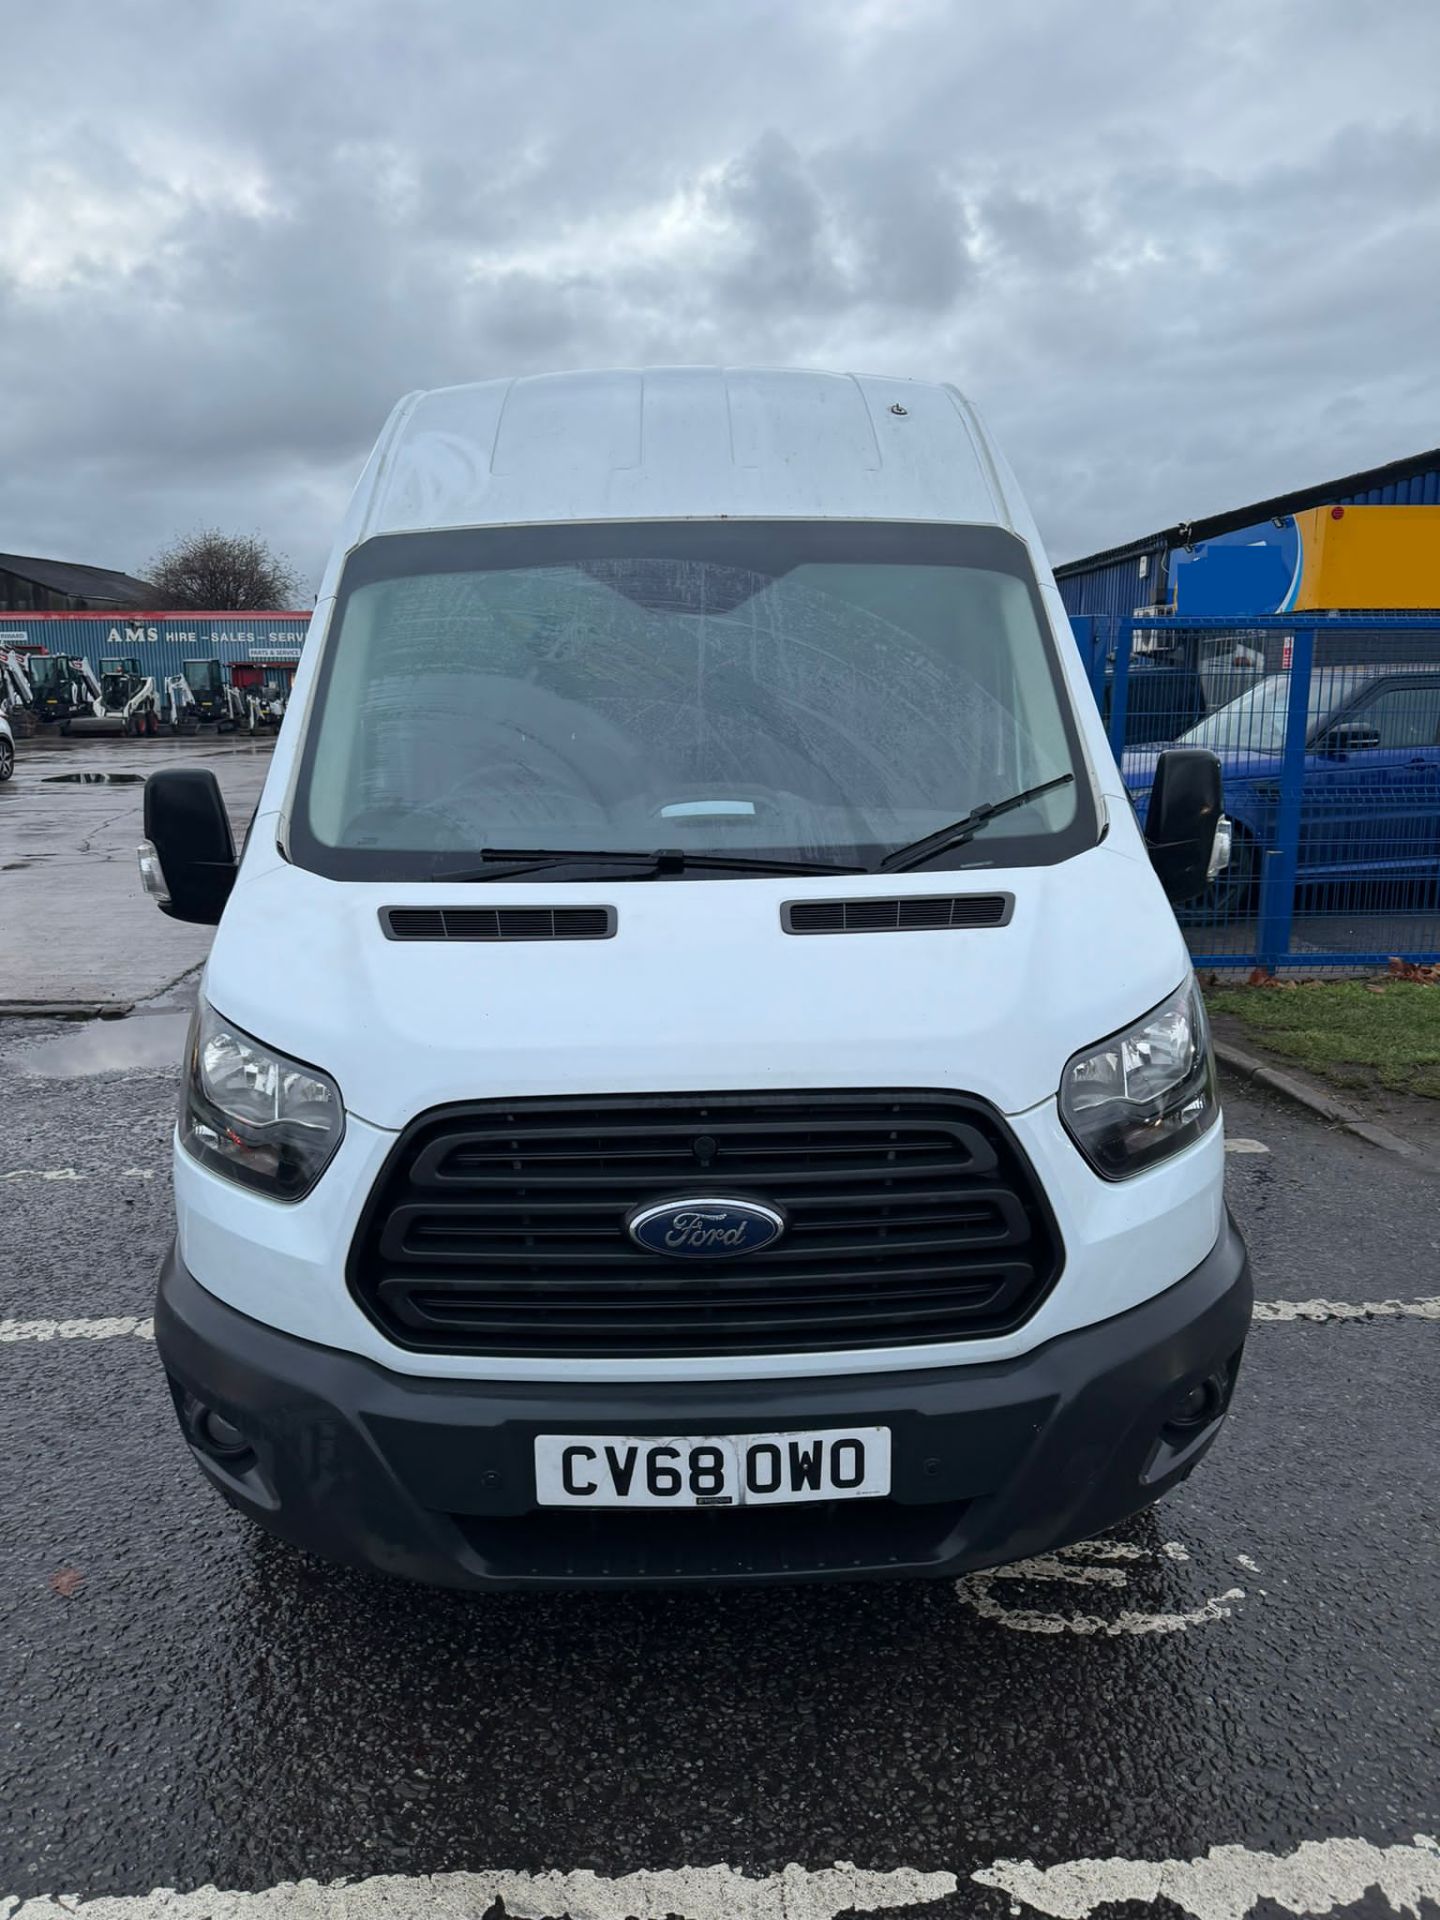 2018 68 FORD TRANSIT 350 PANEL VAN - RWD - EURO 6 - PLY LINED - 98k MILES - Image 9 of 11